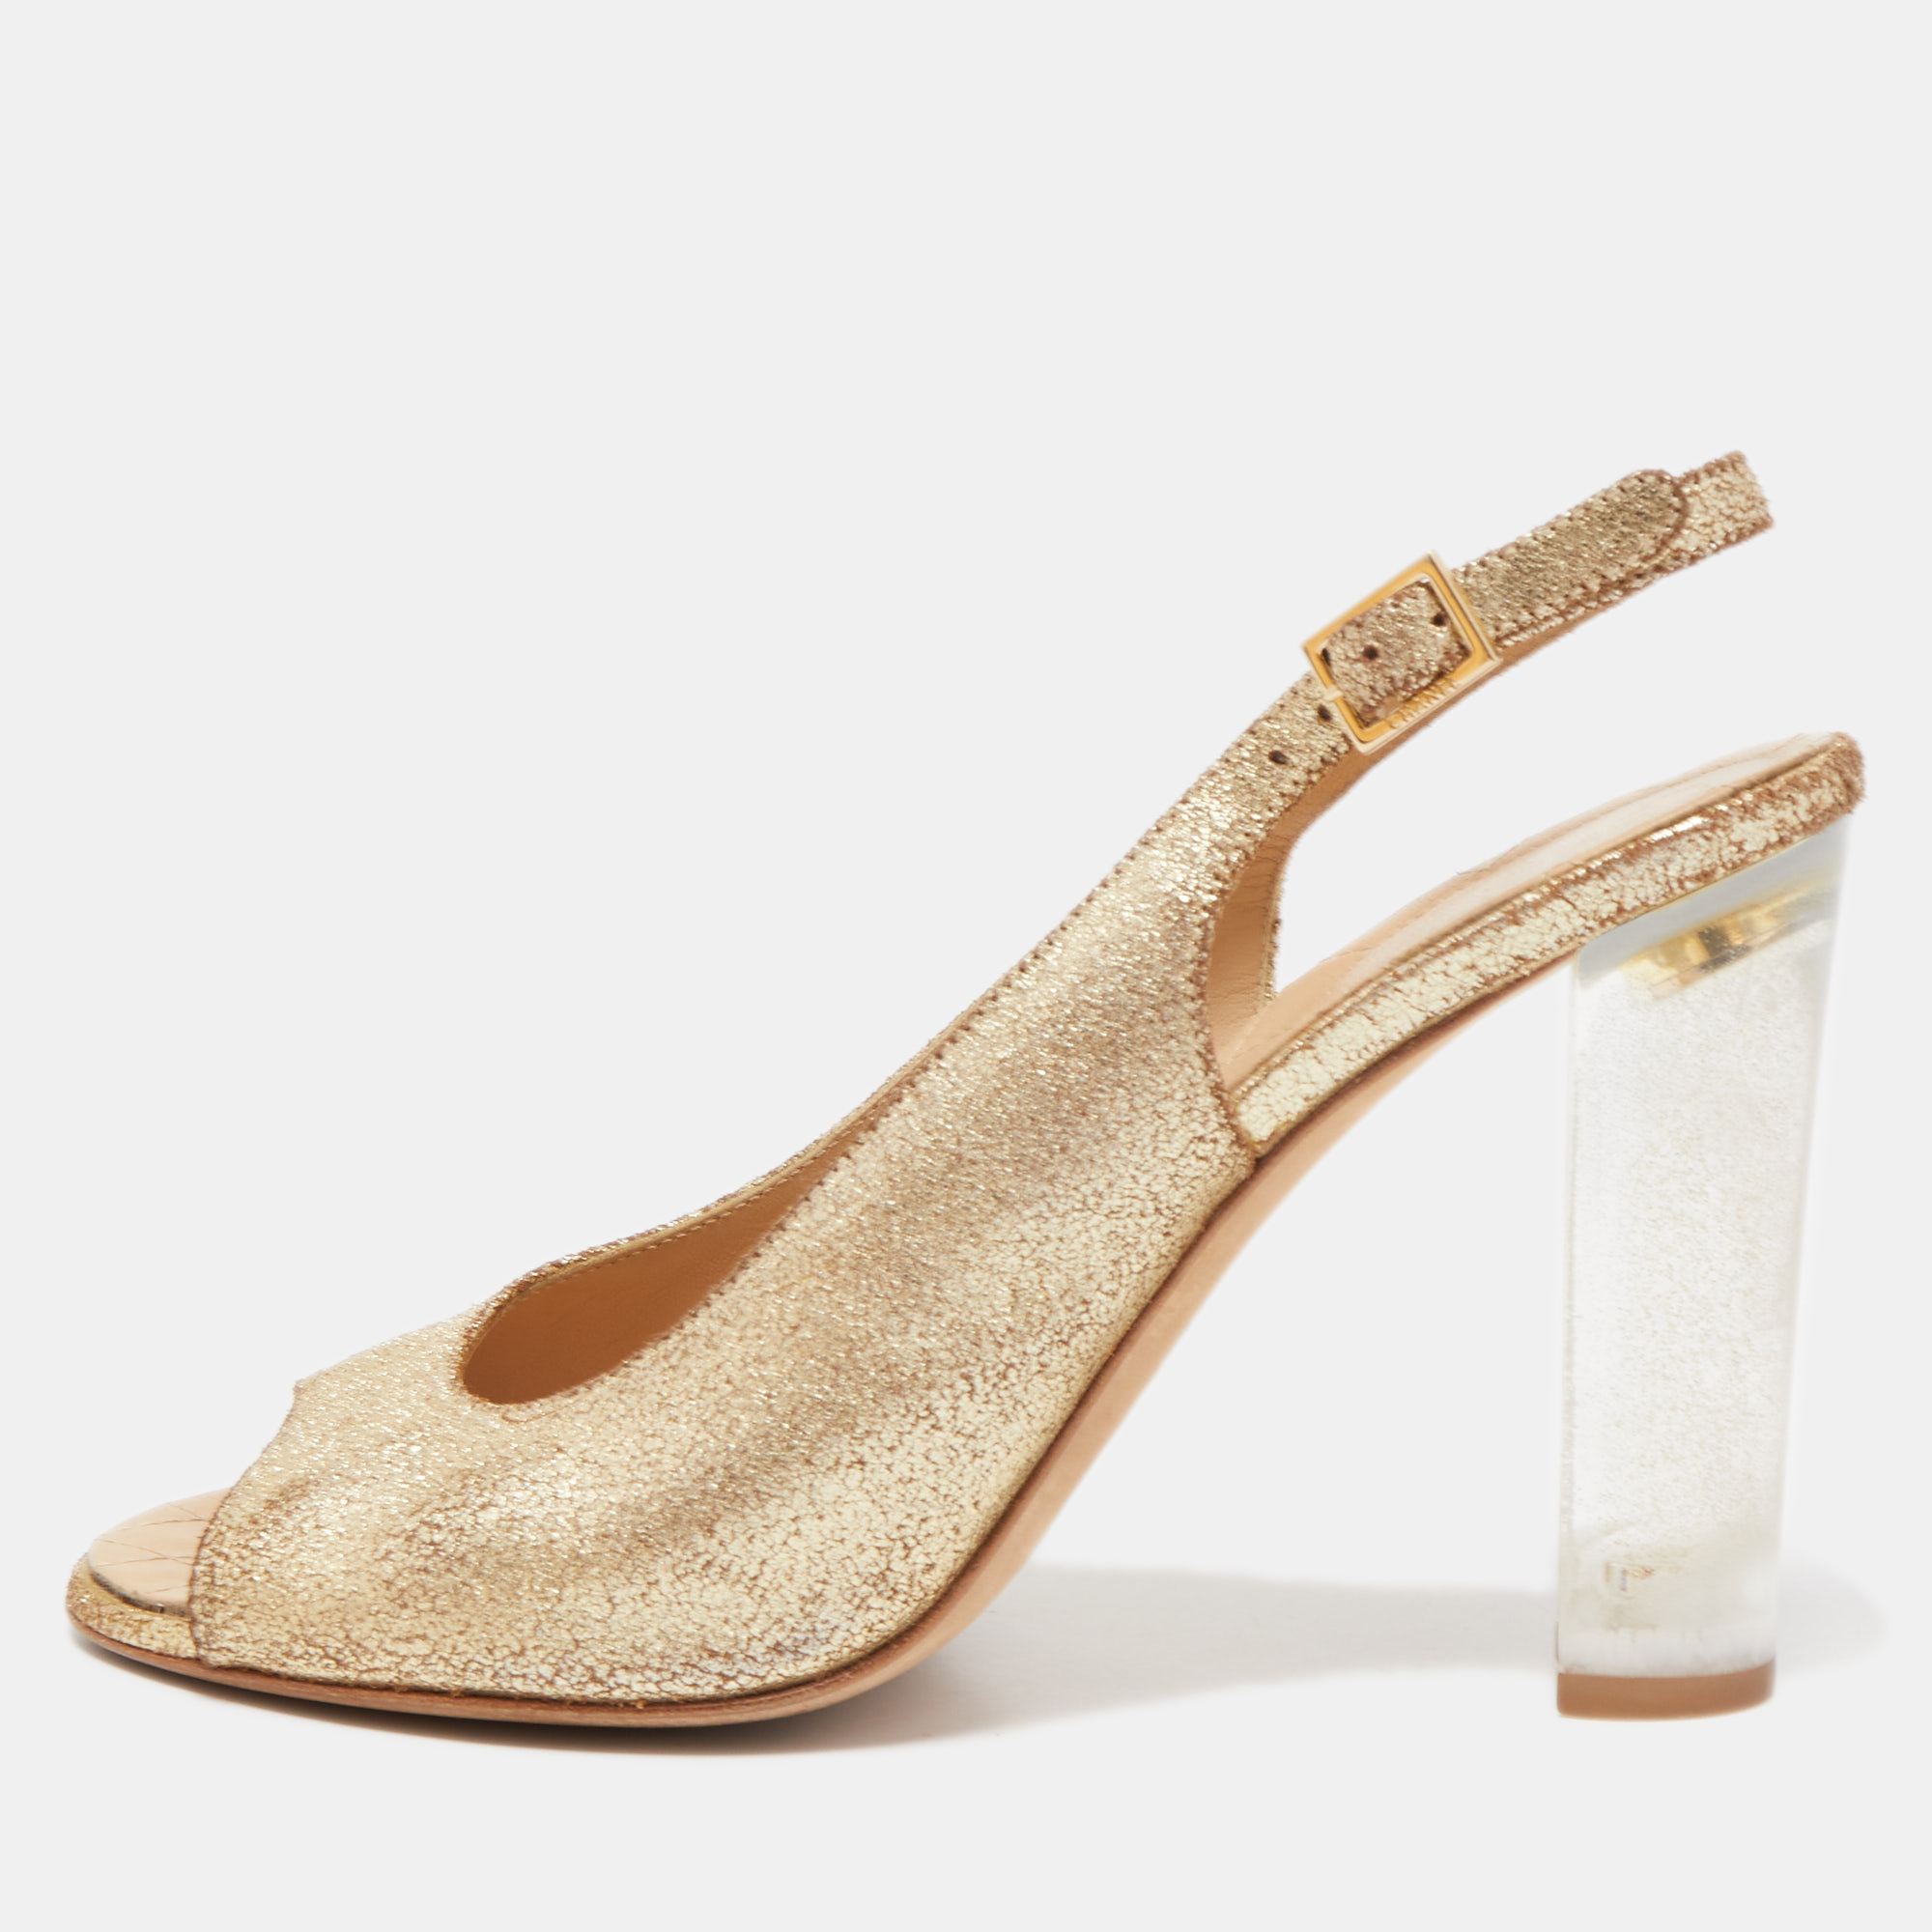 Pre-owned Chanel Gold Crackled Leather Glitter Cc Lucite Heel Peep Toe Slingback Sandals Size 39